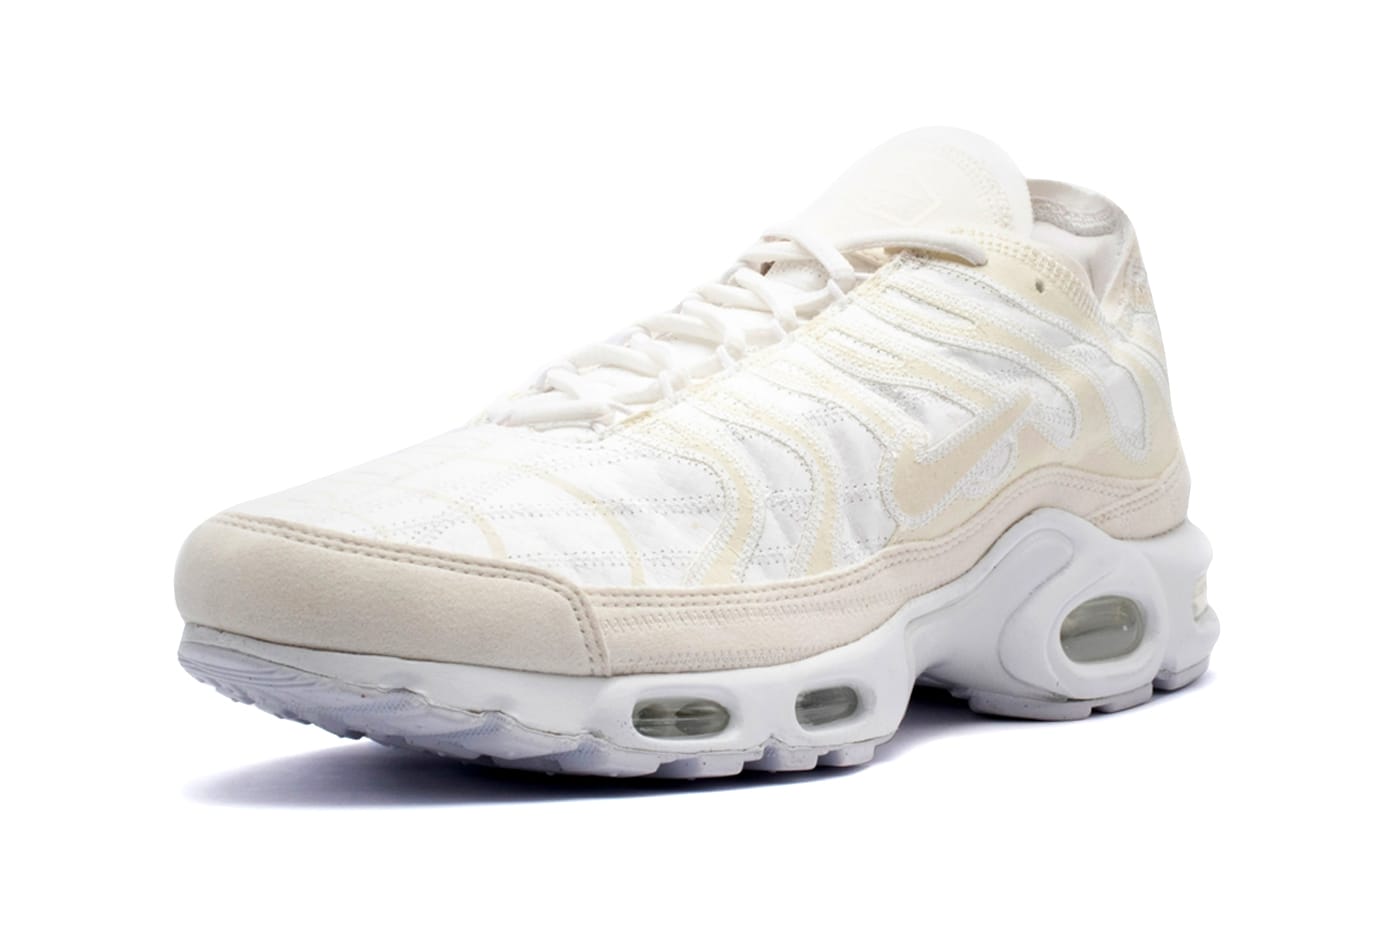 Nike Air Max Plus Deconstructed \